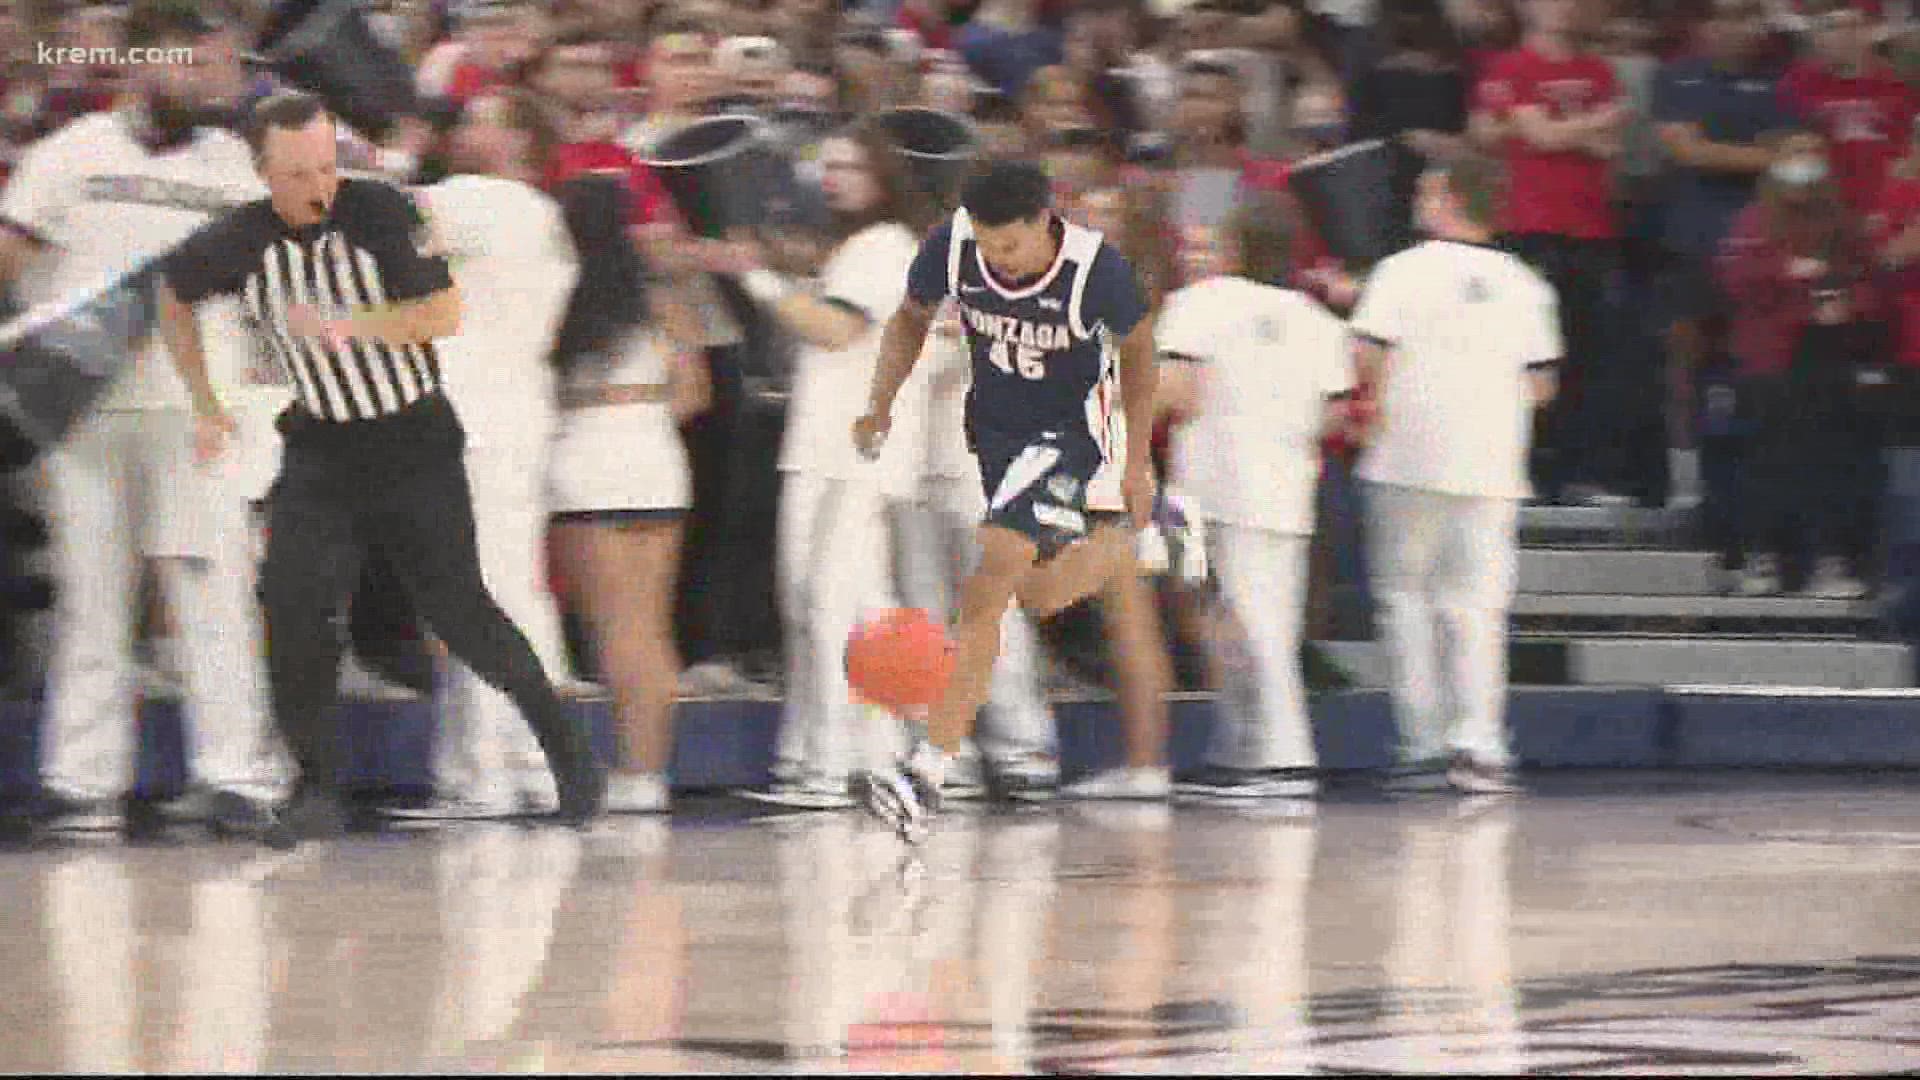 Gonzaga celebrated the return of basketball season with Kraziness in the Kennel